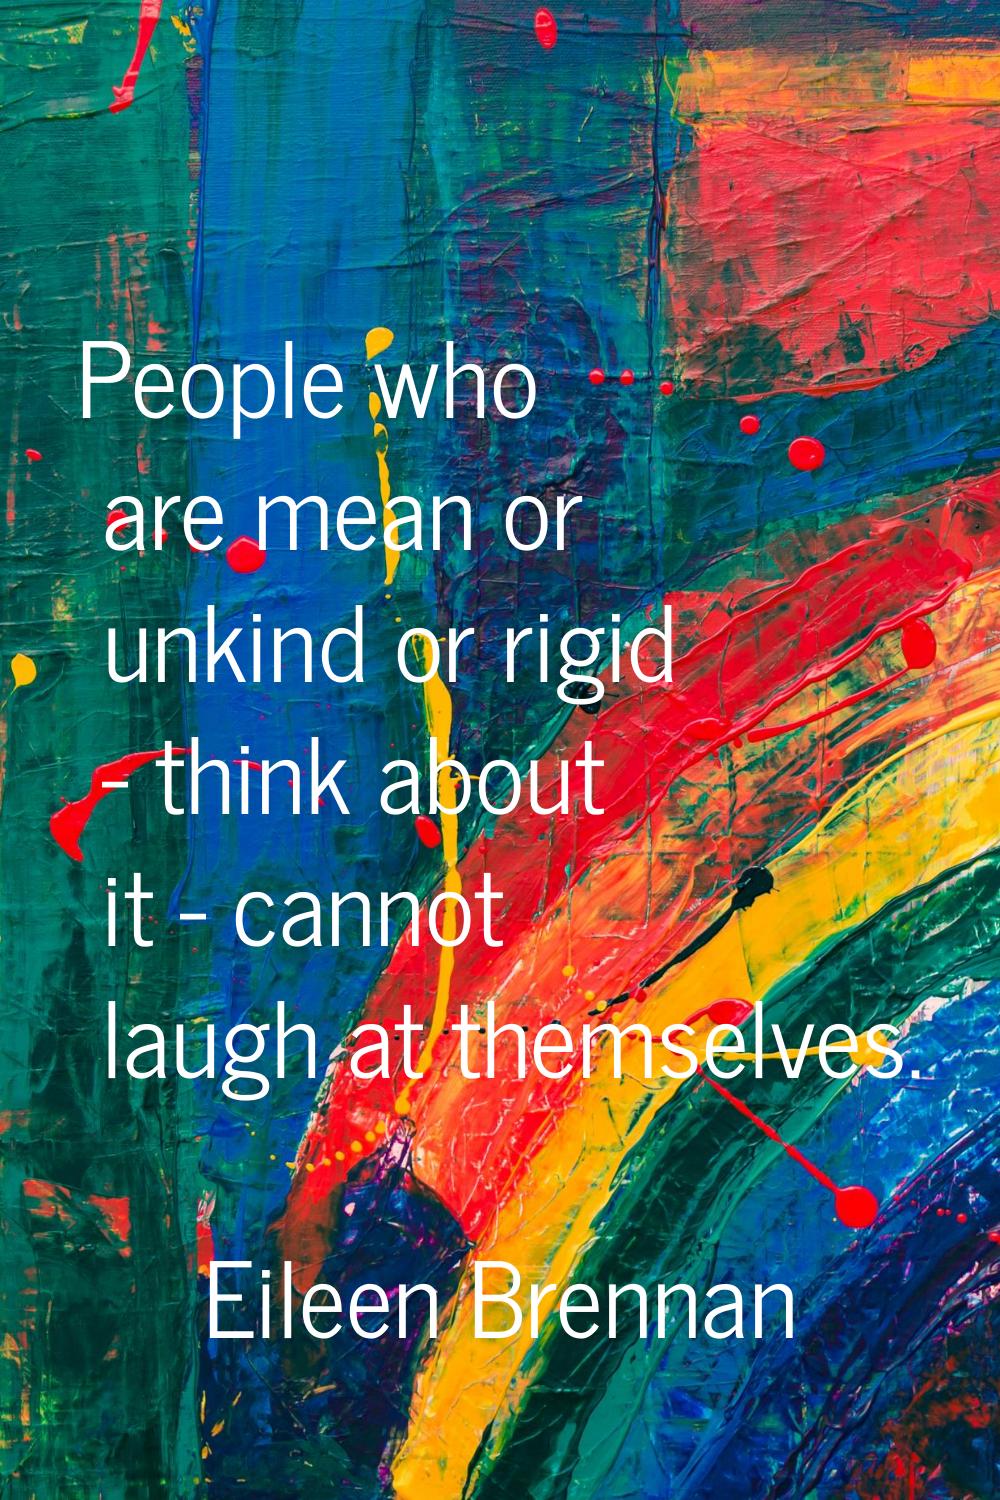 People who are mean or unkind or rigid - think about it - cannot laugh at themselves.